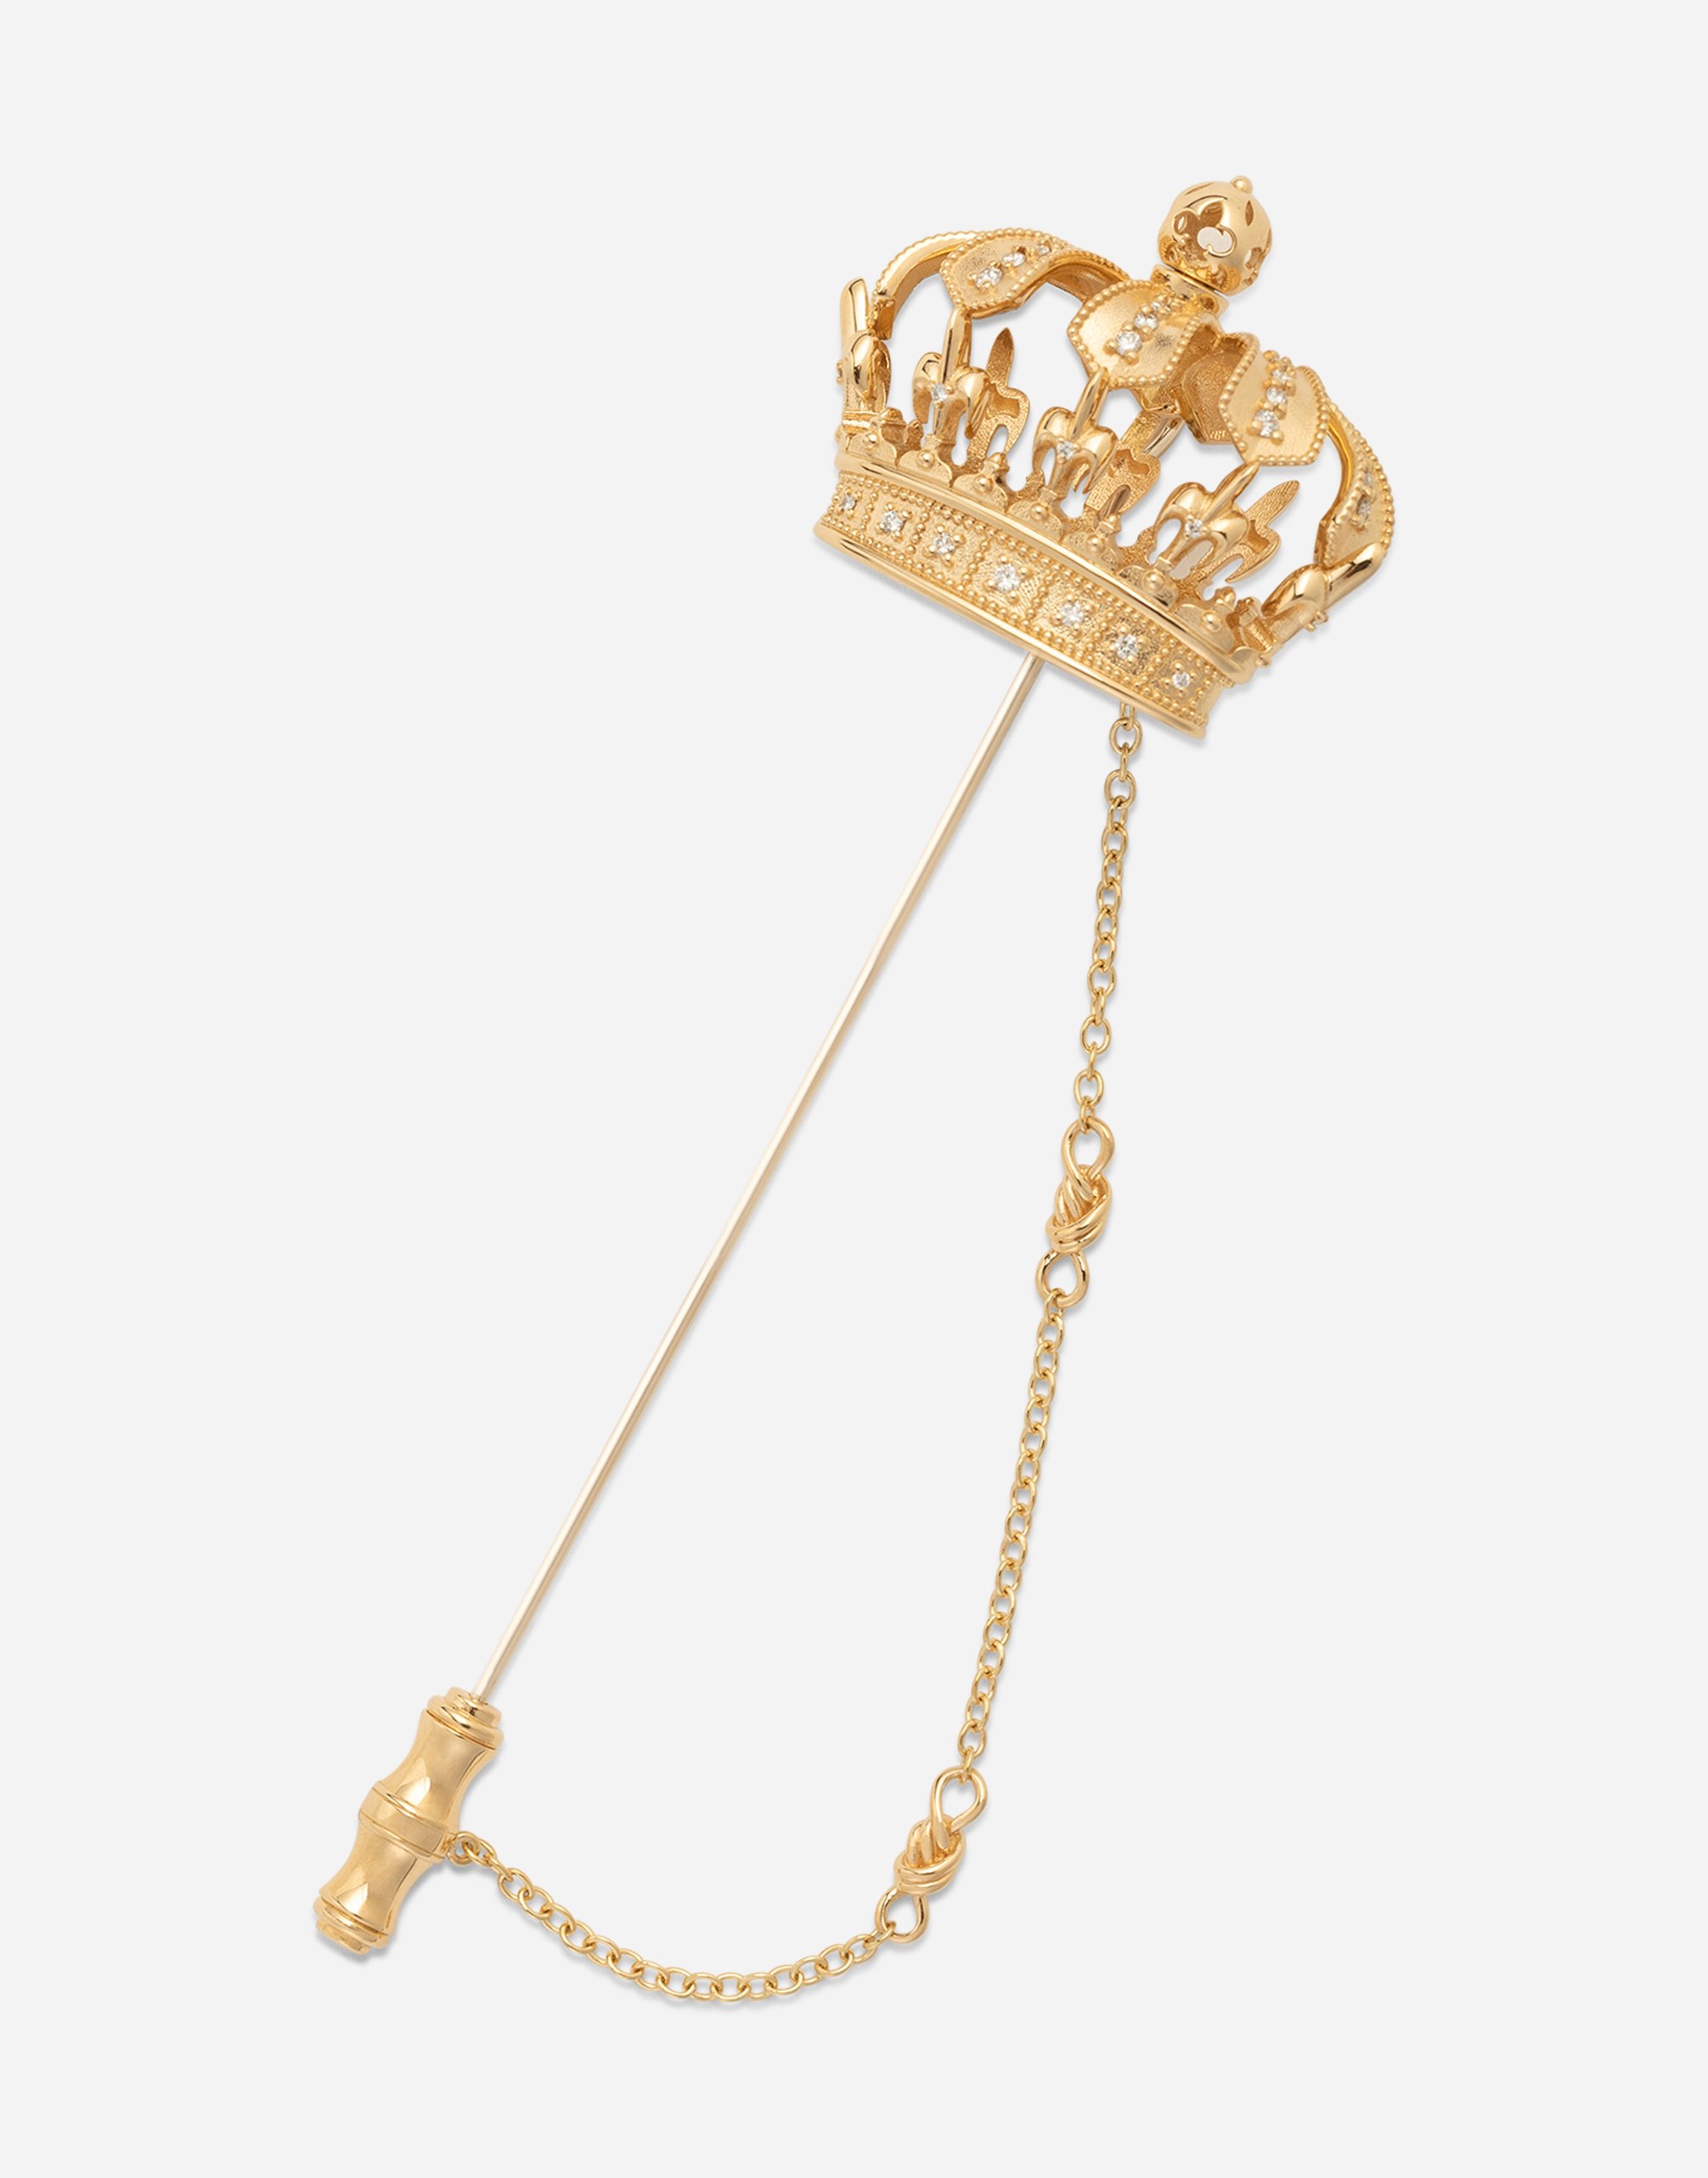 Crown stick pin brooch in yellow and white gold with curly gold thread embellishments and sphere in Gold